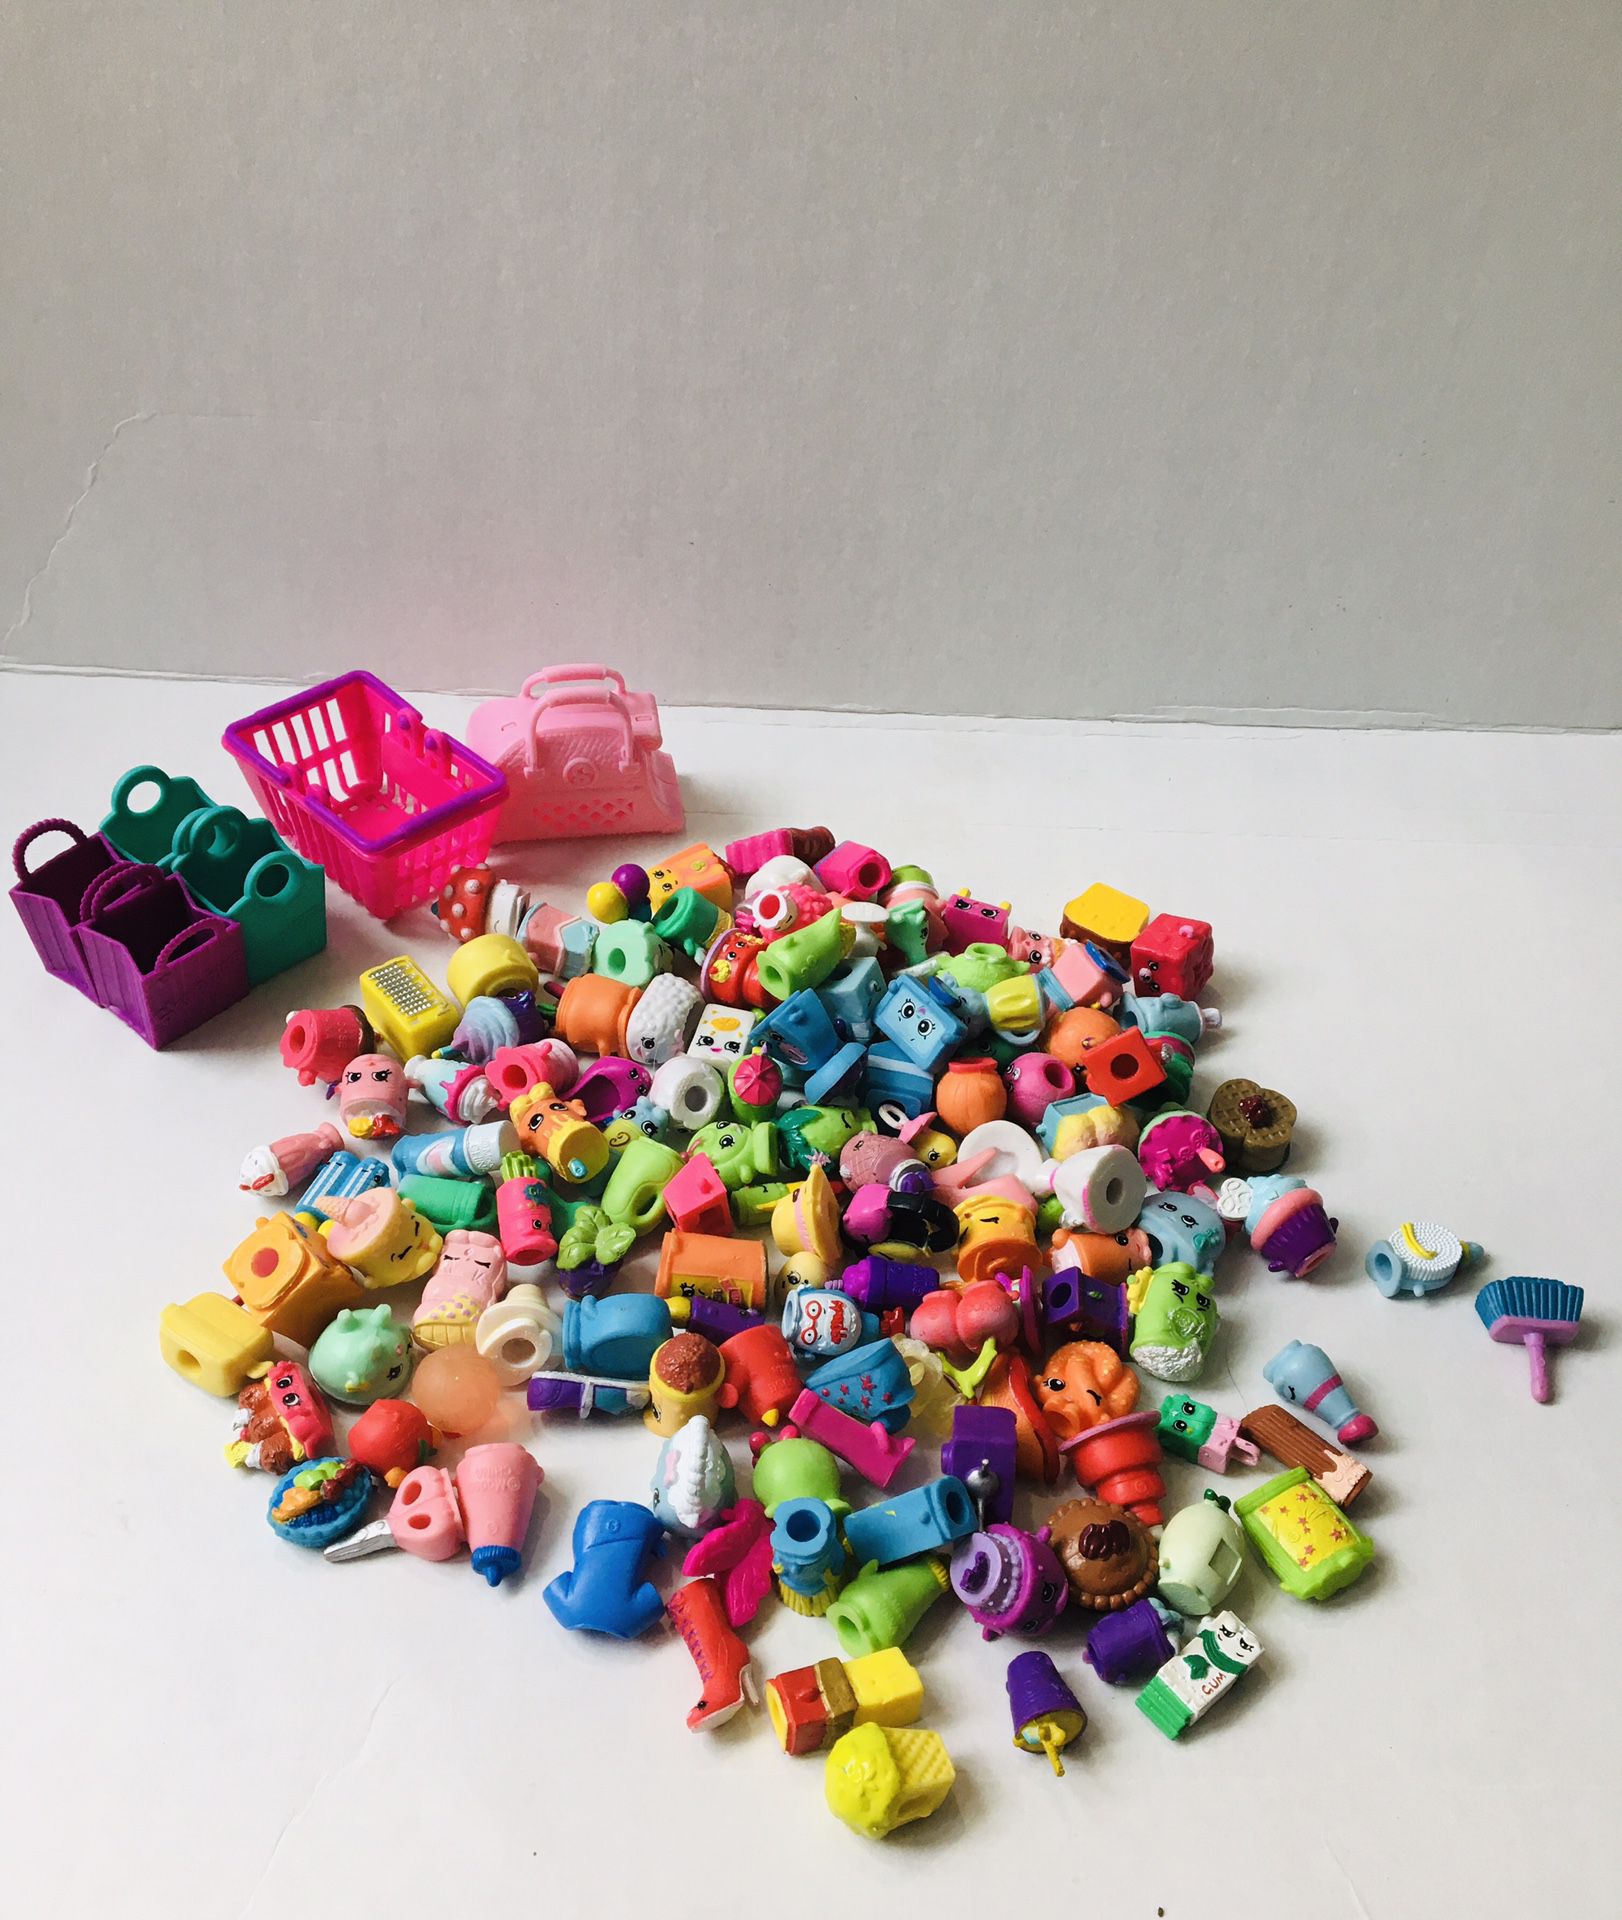 Spectacular Shopkins For Sale!!!😍😃😍